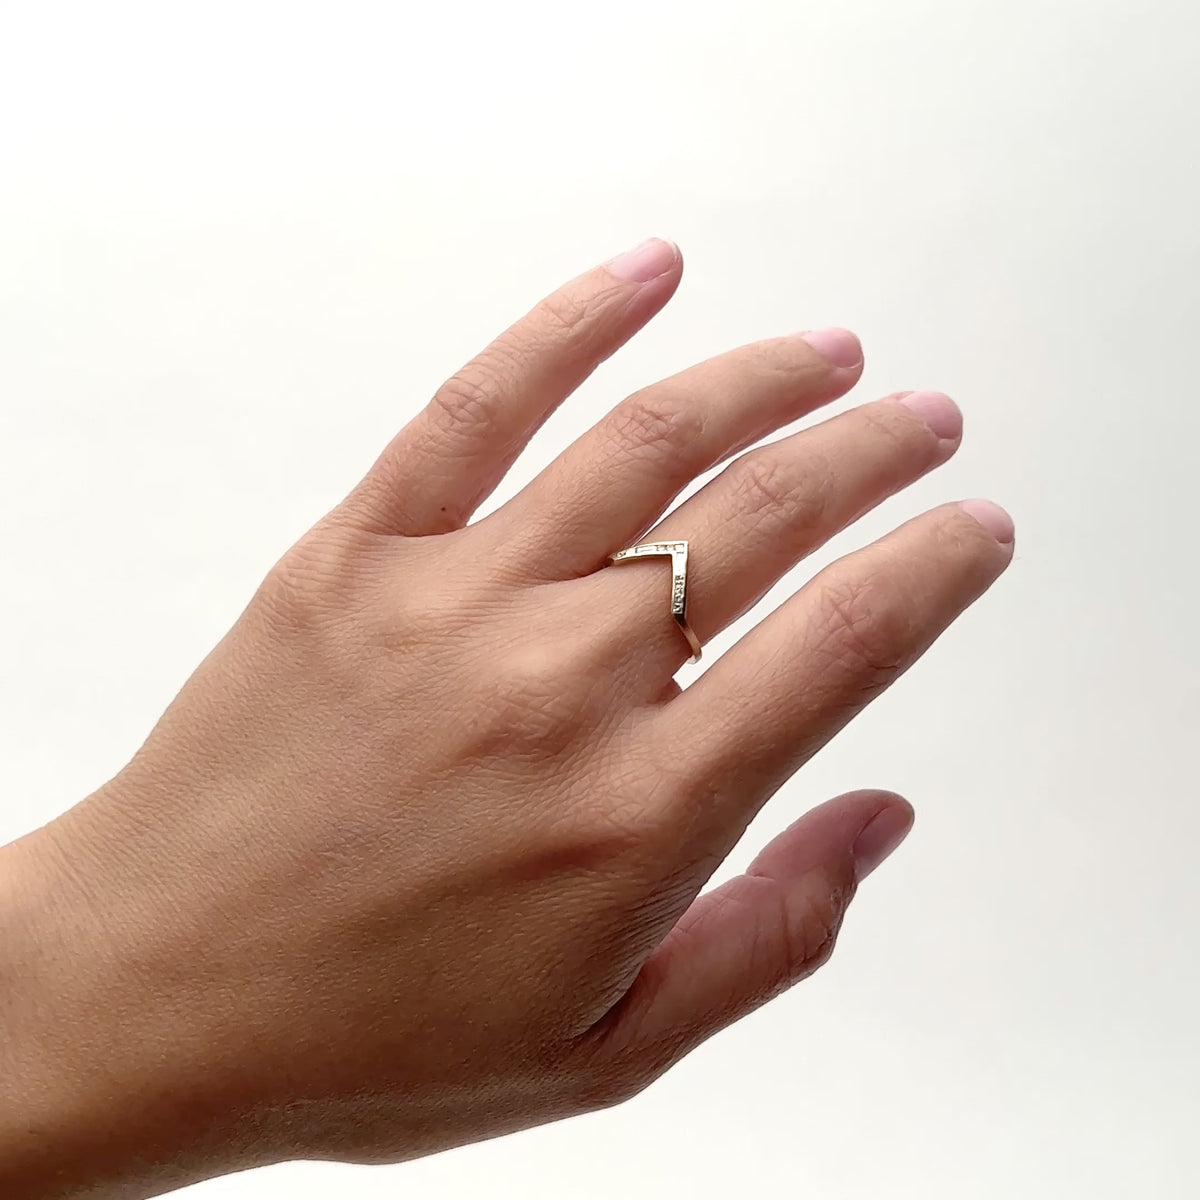 A model wears a V-shaped Altus 14K recycled gold stacking ring, with lab-grown diamonds on their middle finger. They roatet their hand from left to right. Designed and handcrafted in Portland, Oregon.